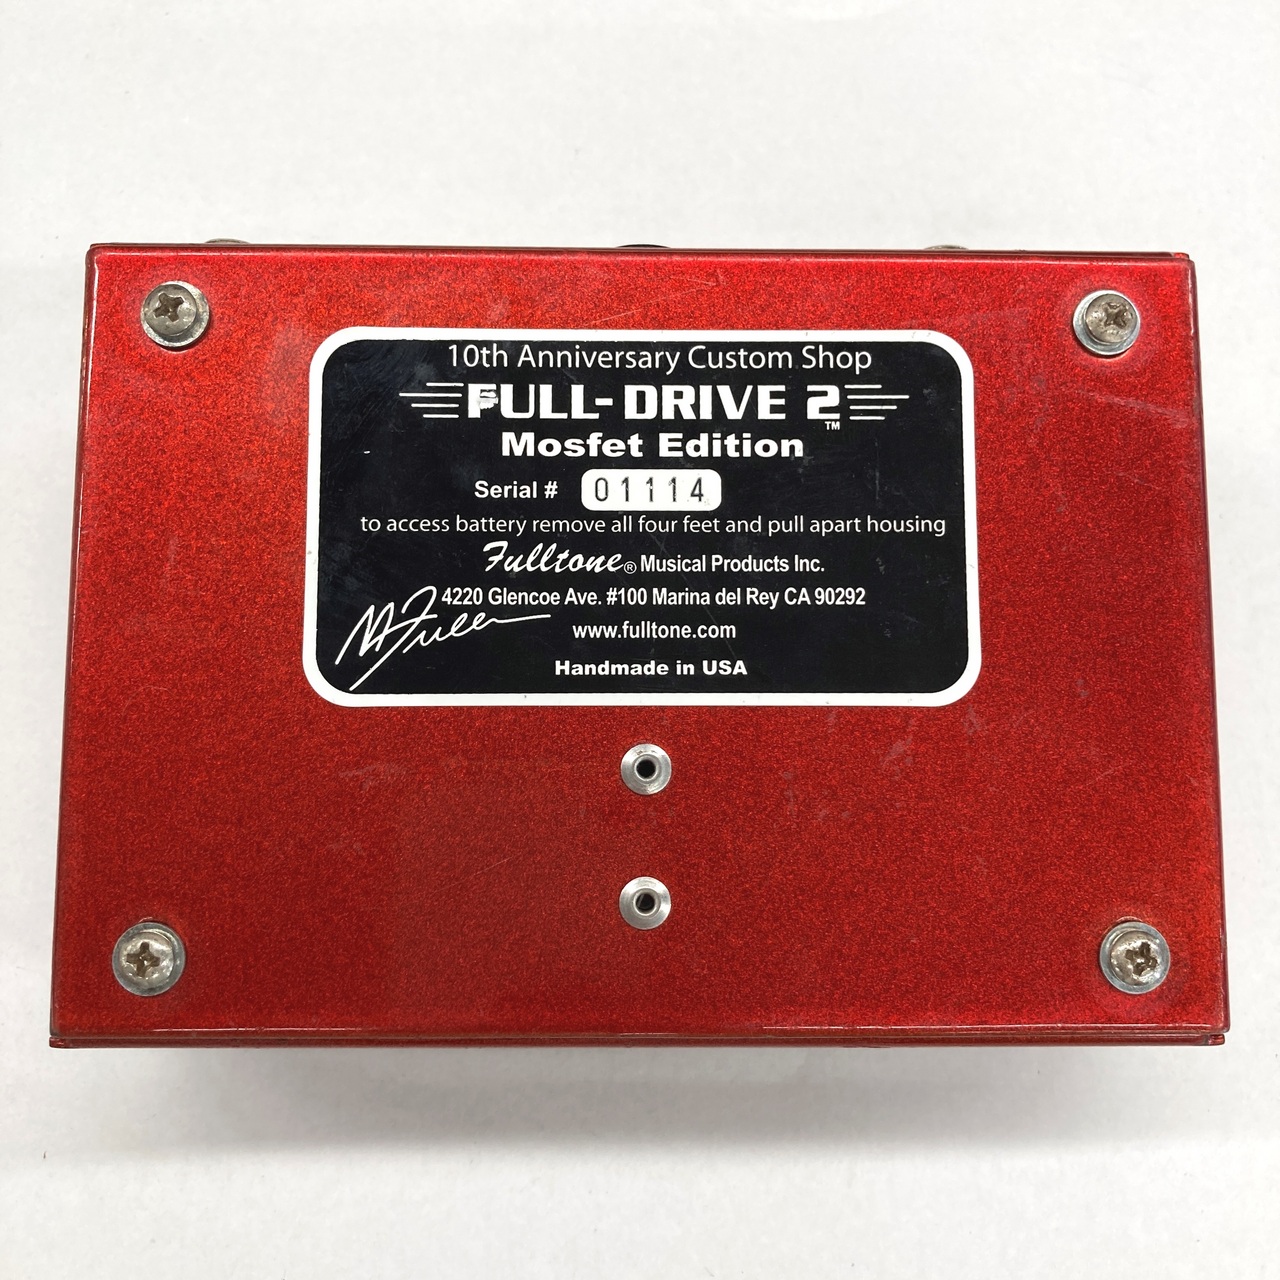 Full Drive 2 10th Anniversary MOSFET